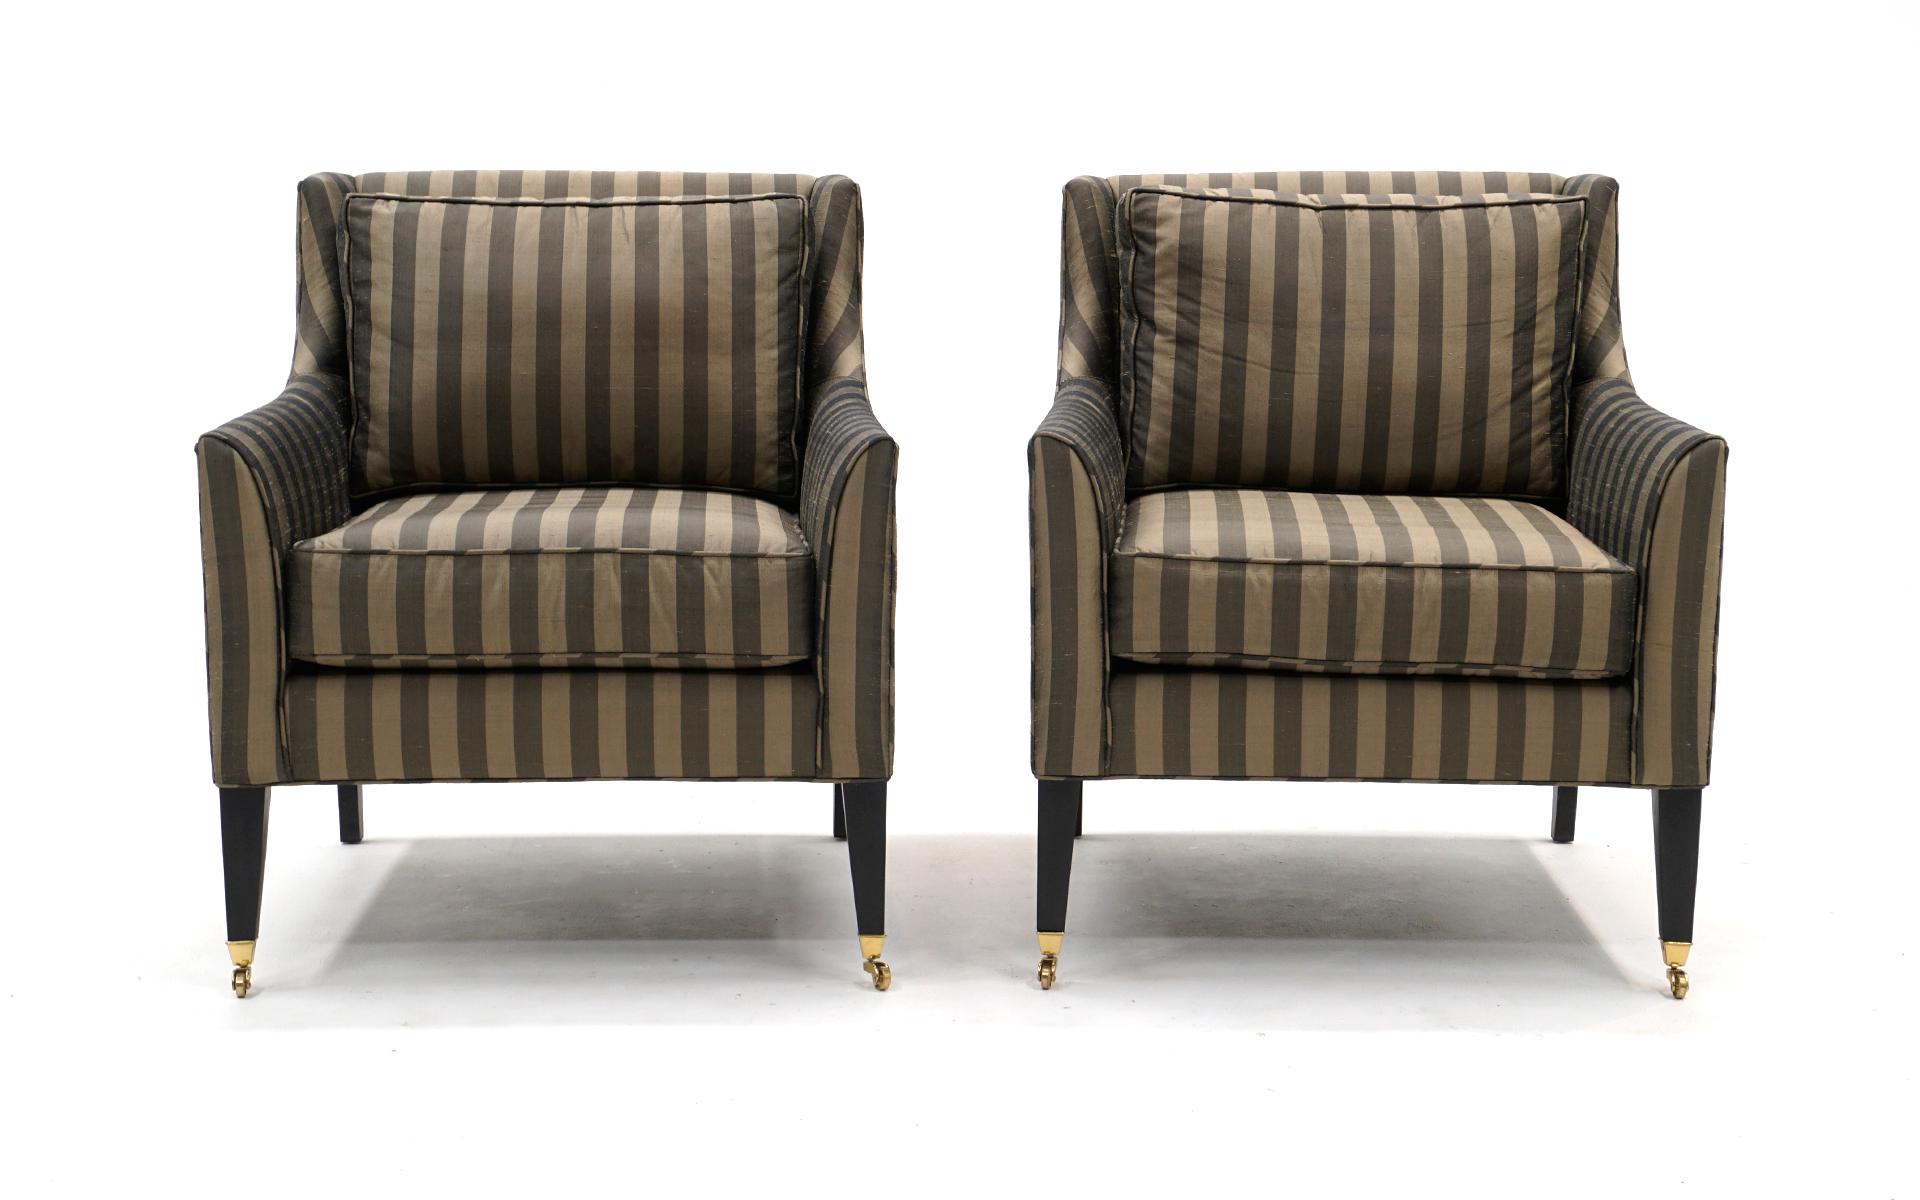 Pair of Lounge Chairs in the style of Edward Wormley for Dunbar. Elegant striped upholstery in tan and gray. Comfortable and ready to use.